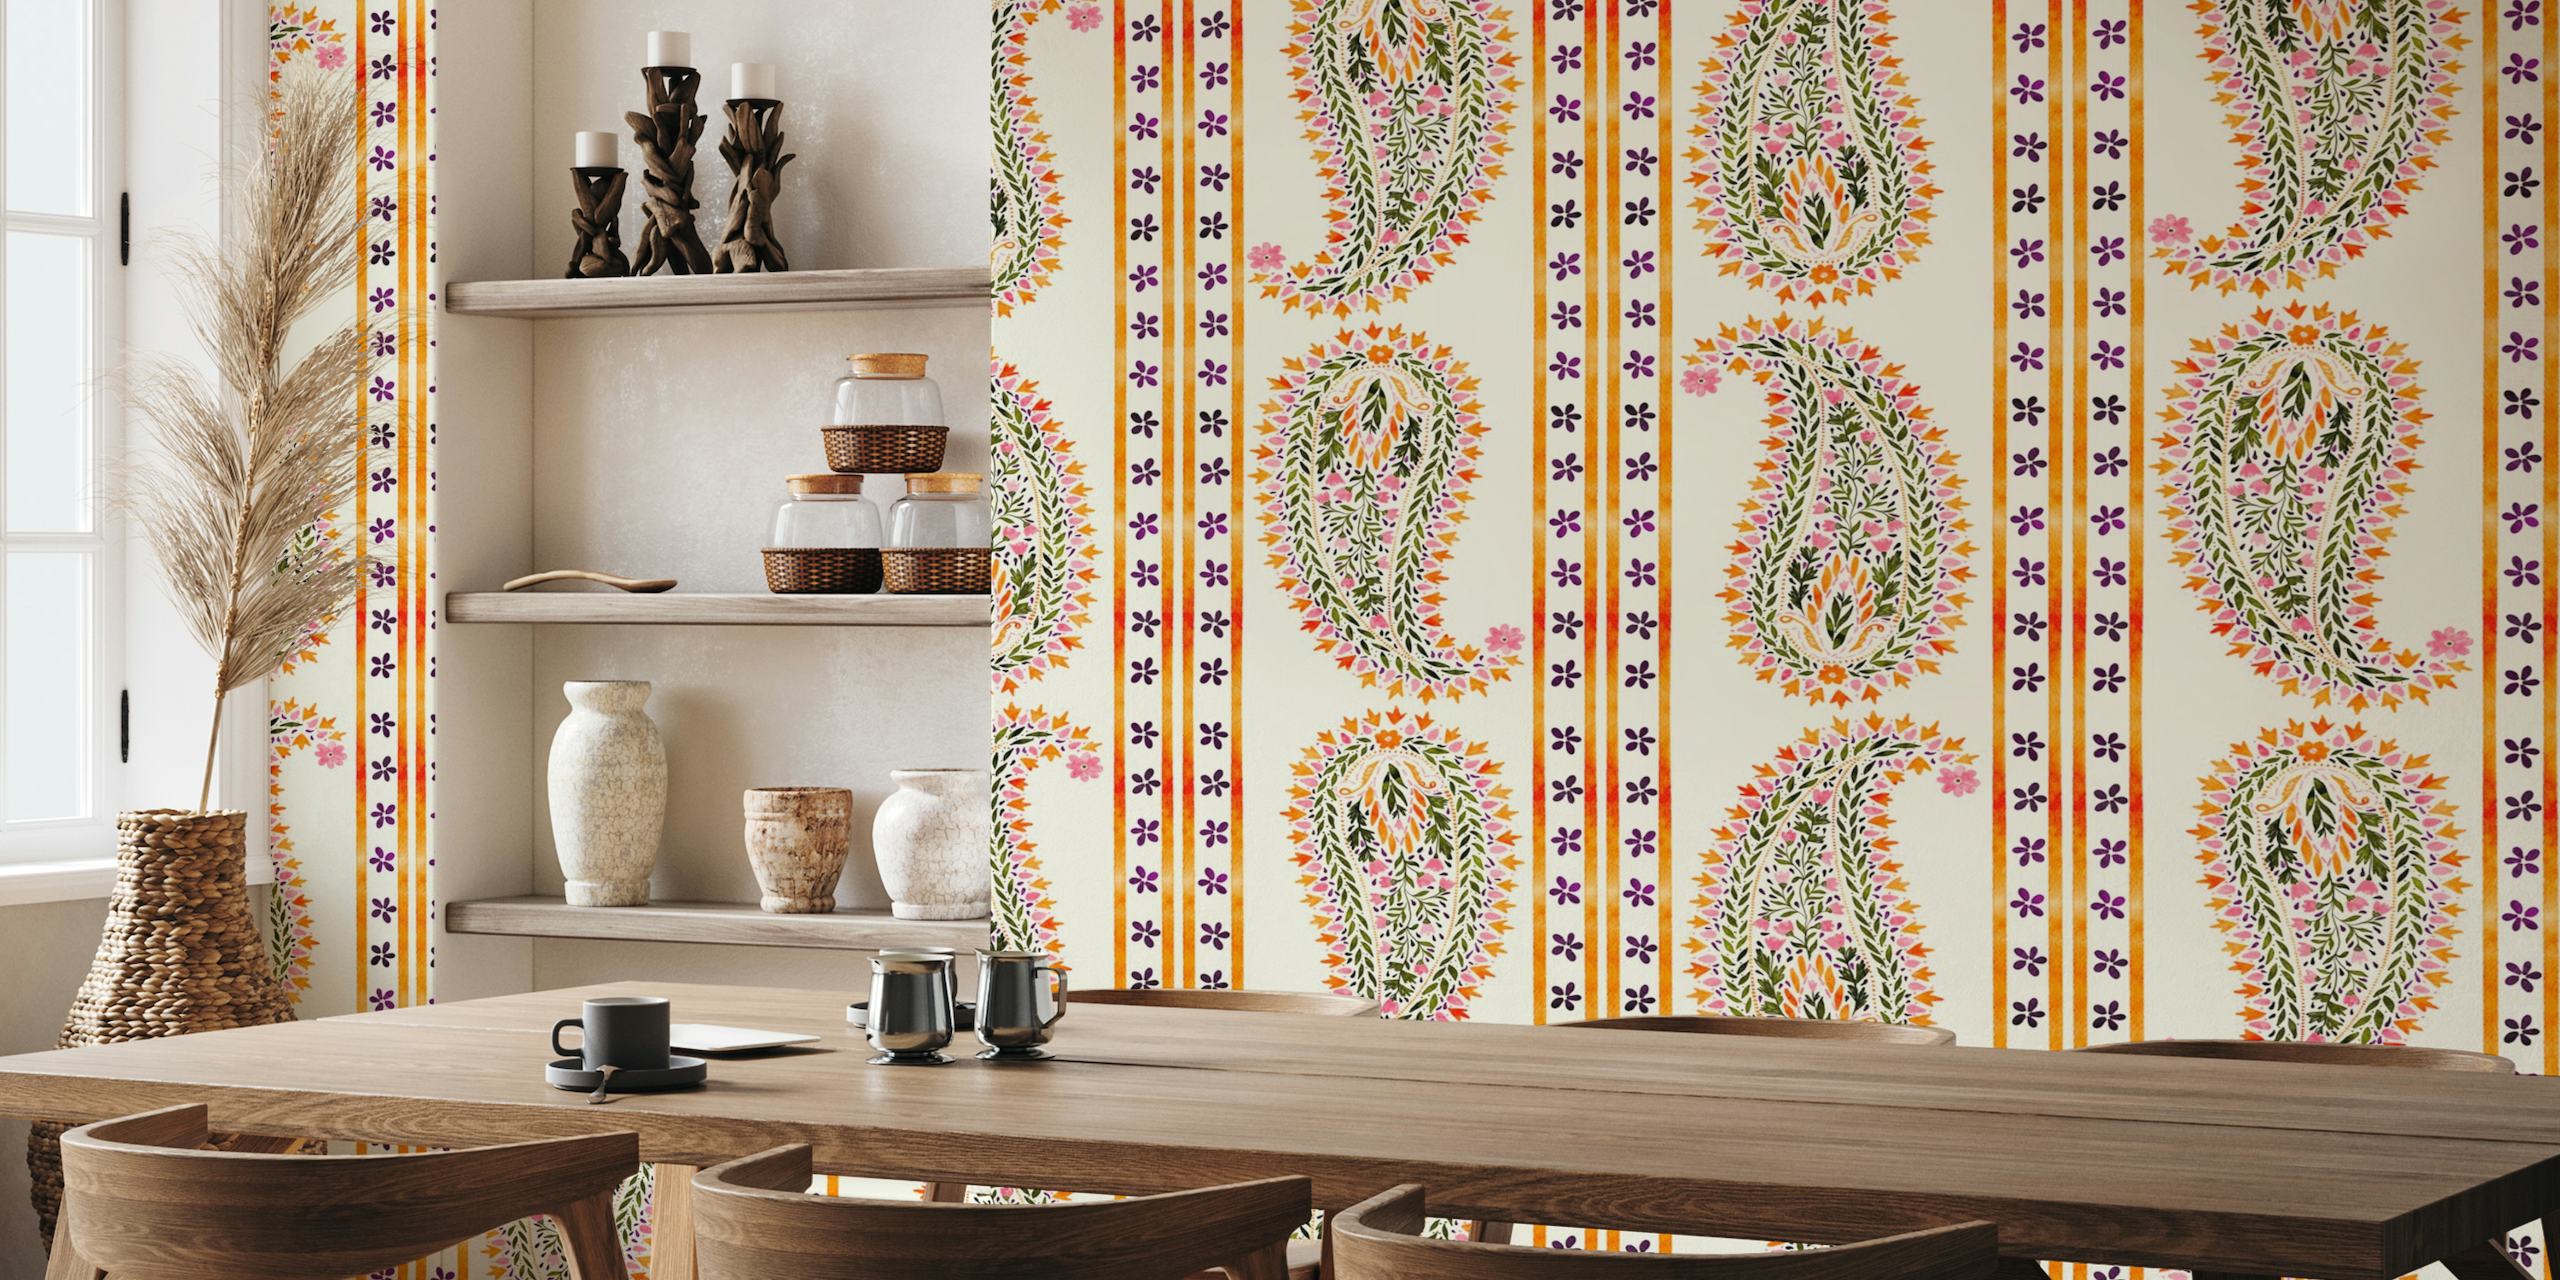 Paisley Blocks and Stripes wall mural with warm hues and intricate designs